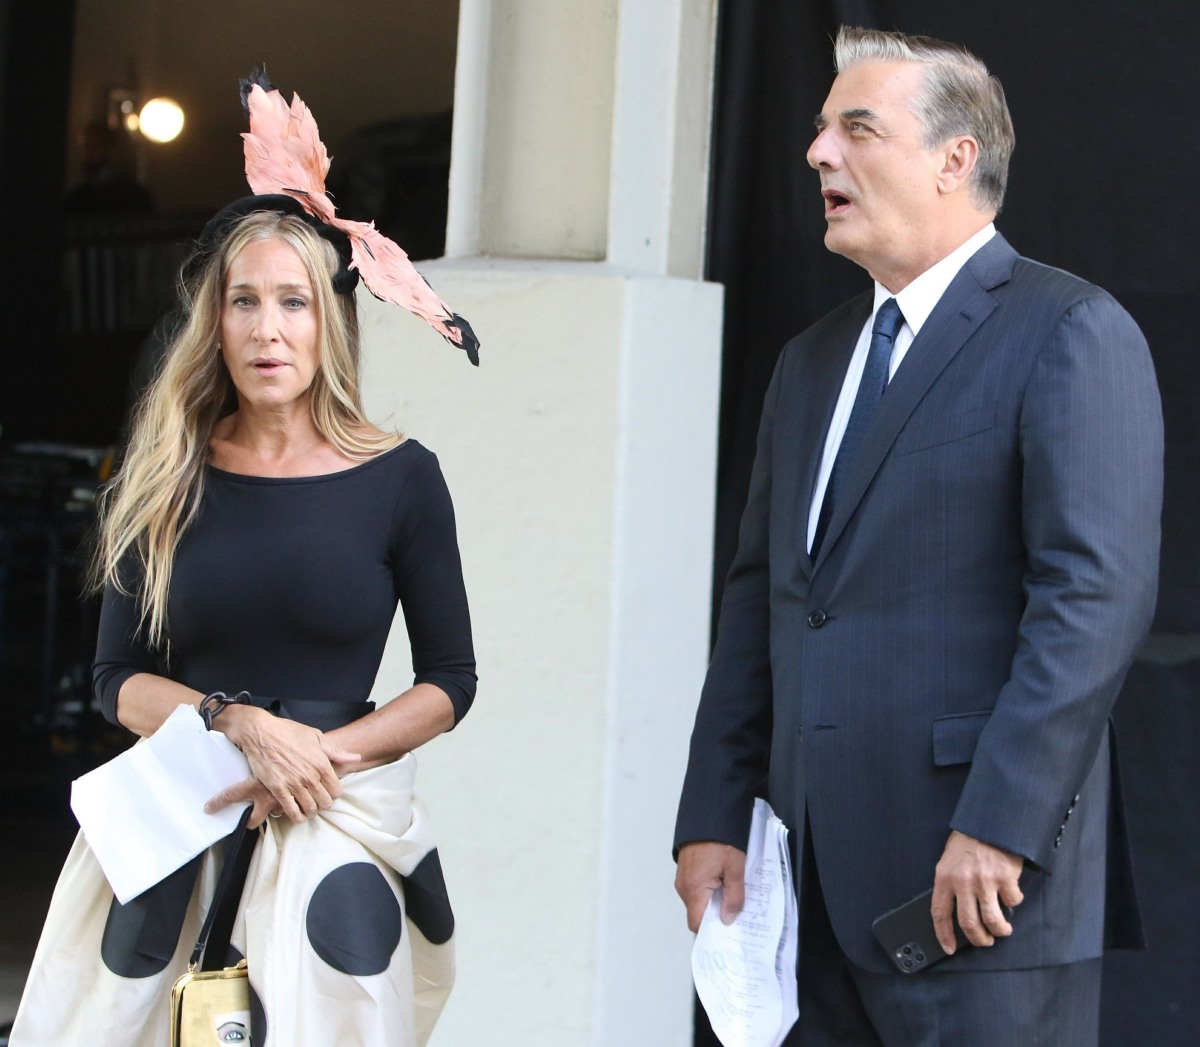 Sarah Jessica Parker and Chris Noth shoot scenes for upcoming 'Sex And The City' reboot 'And Just Like That'